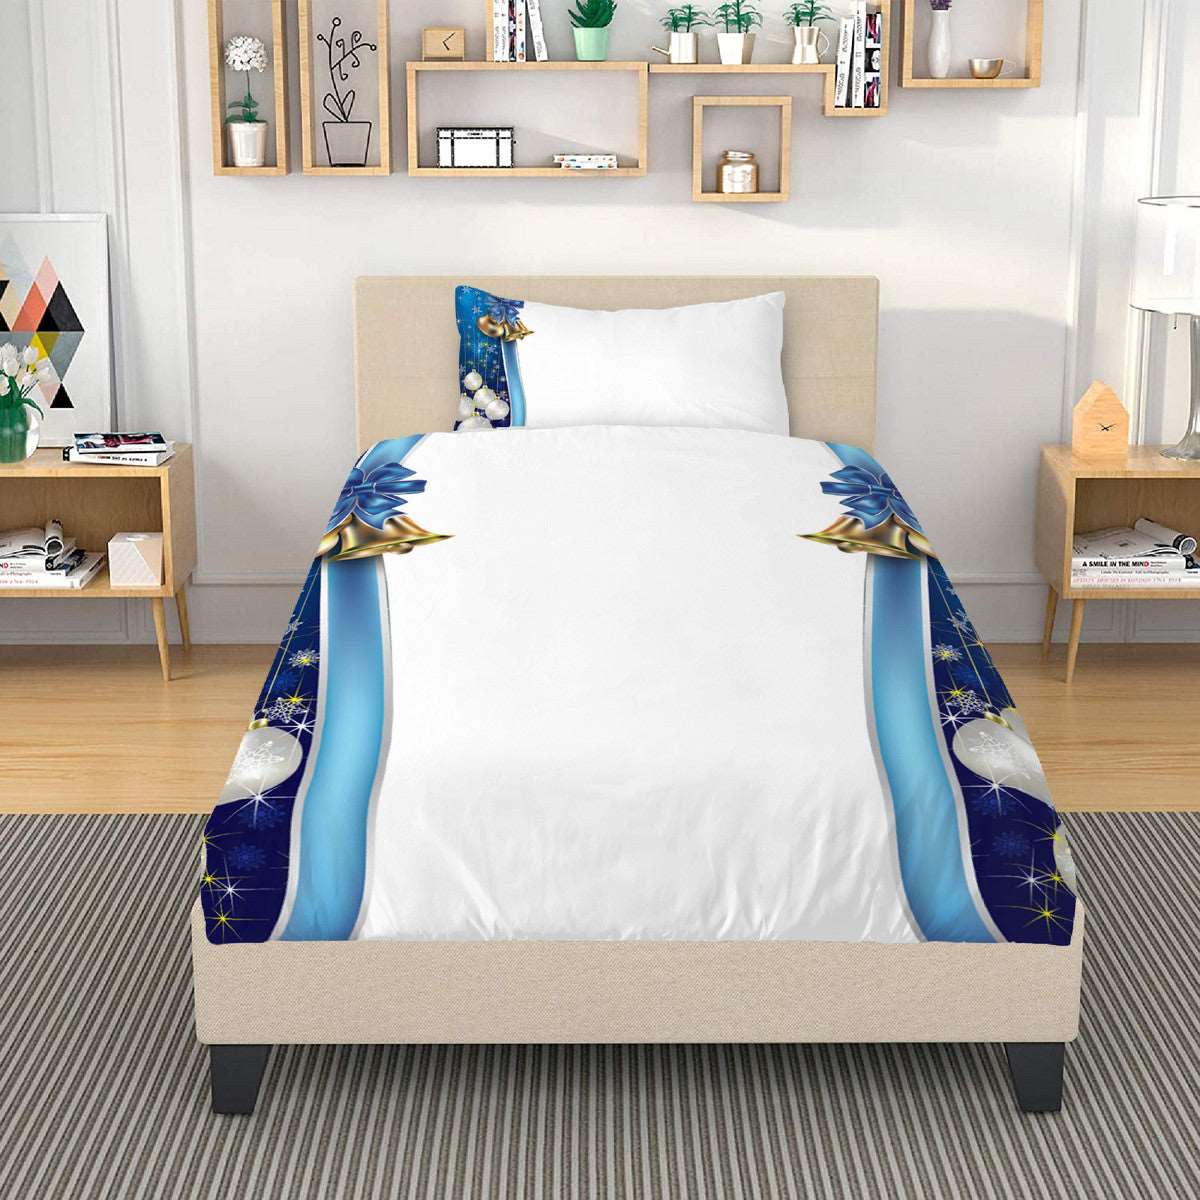 Bedding Christmas Bells royal blue white Home-clothes-jewelry